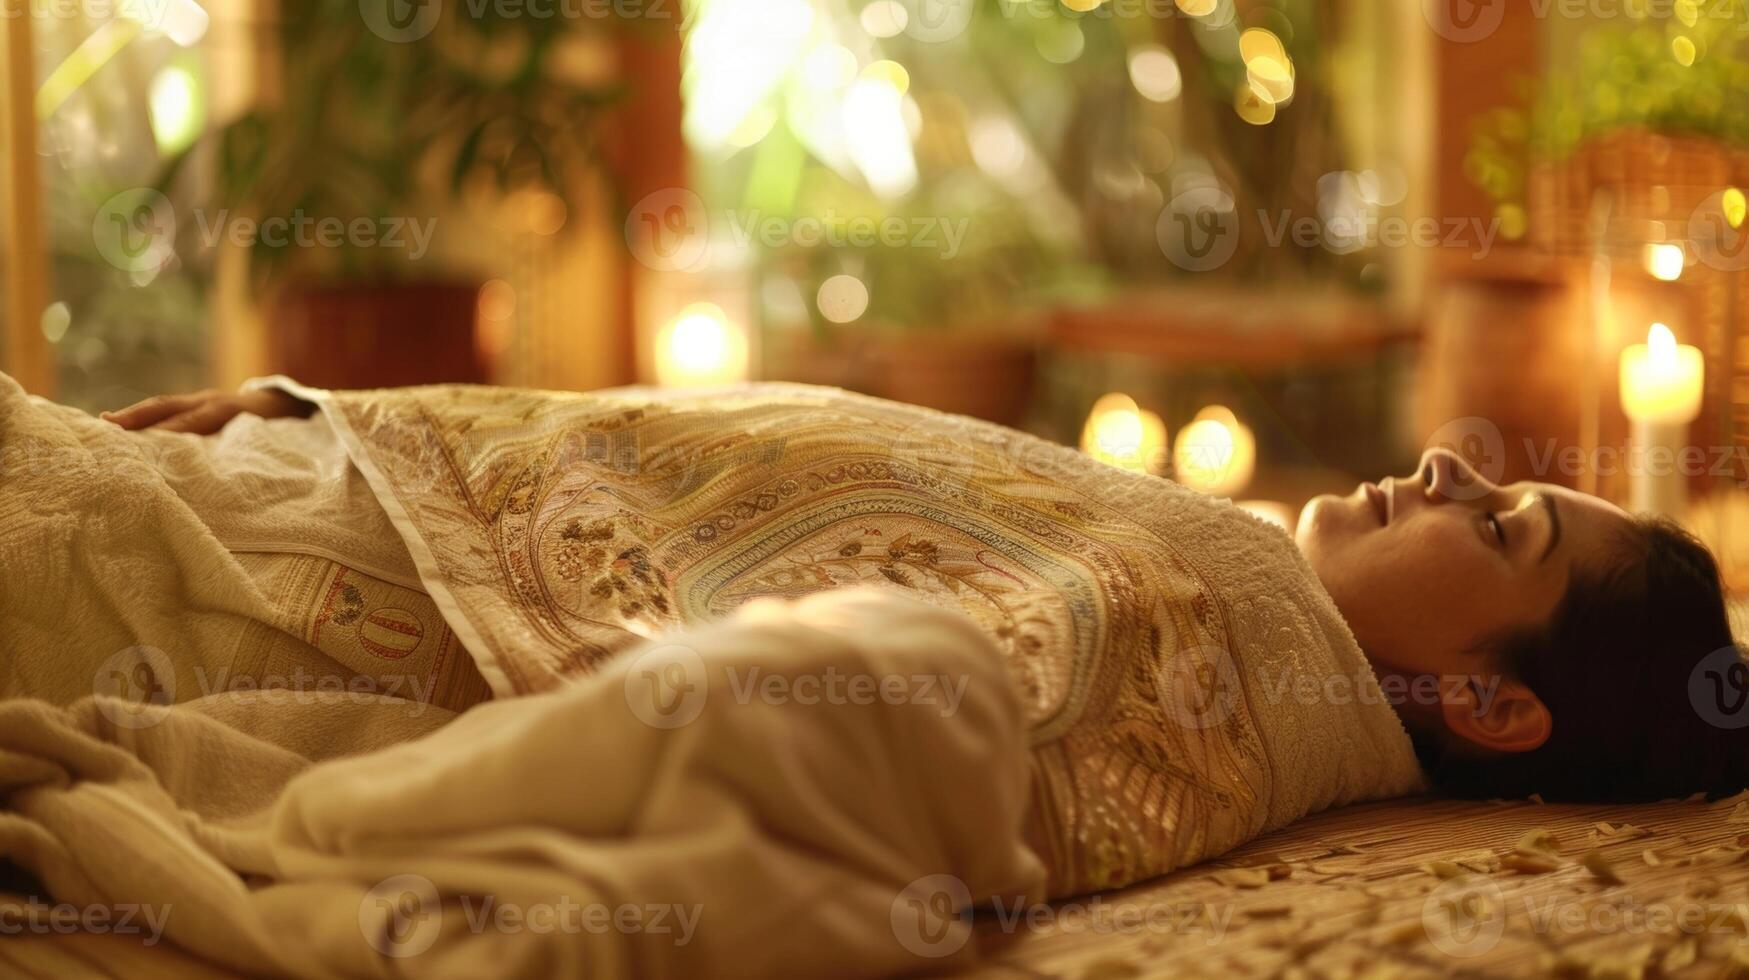 A person lying on a massage table completely covered in a warm herbal wrap while gentle music plays in the background. photo